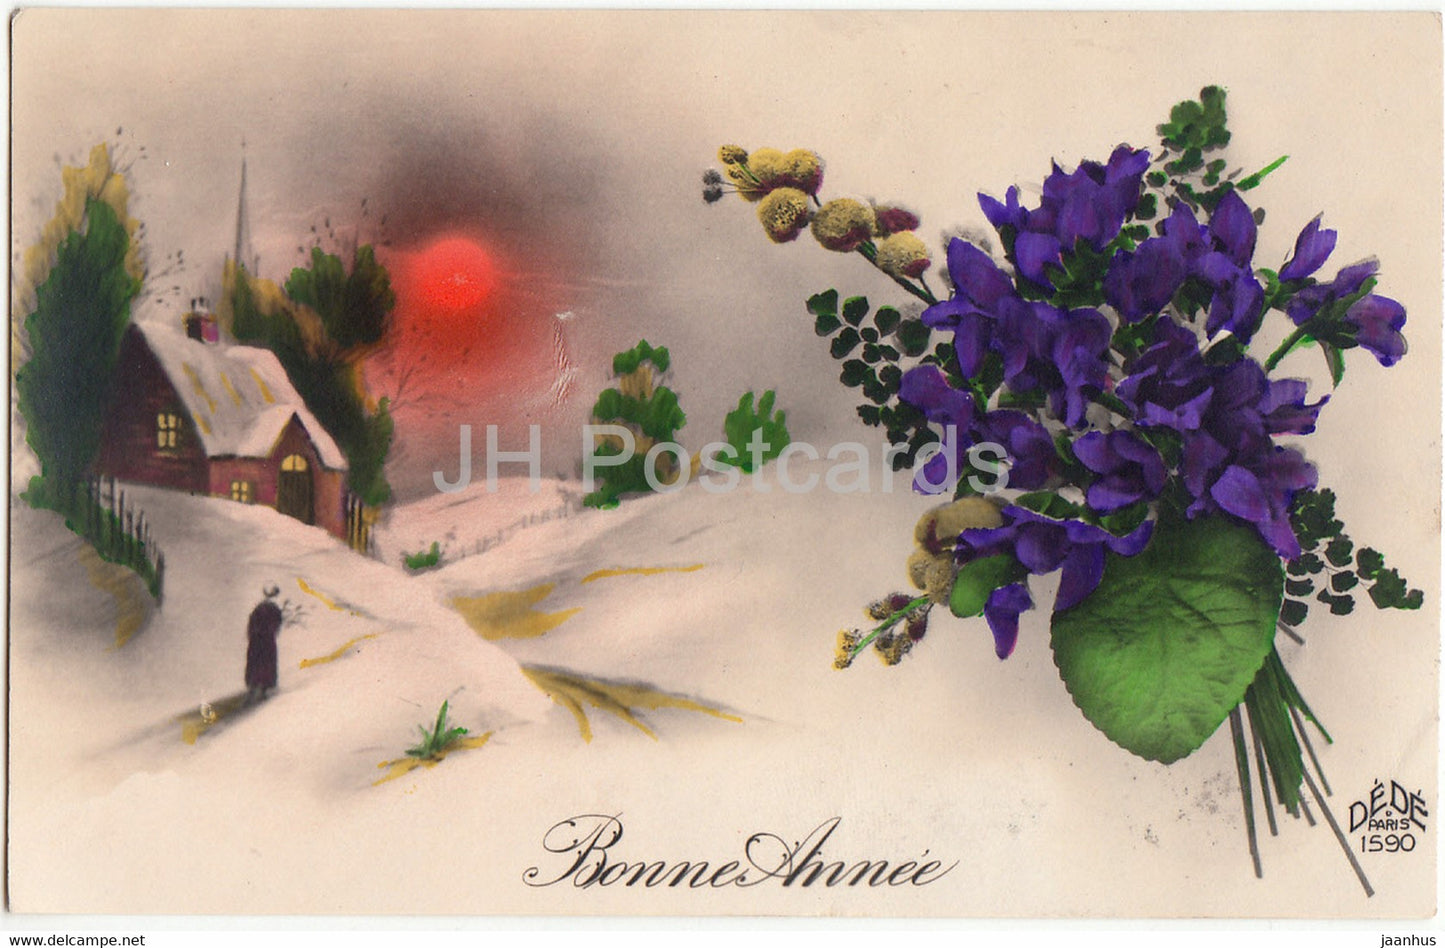 New Year Greeting Card - Bonne Annee - flowers - Church - Dede Paris 1590 - old postcard - 1929 - France - used - JH Postcards